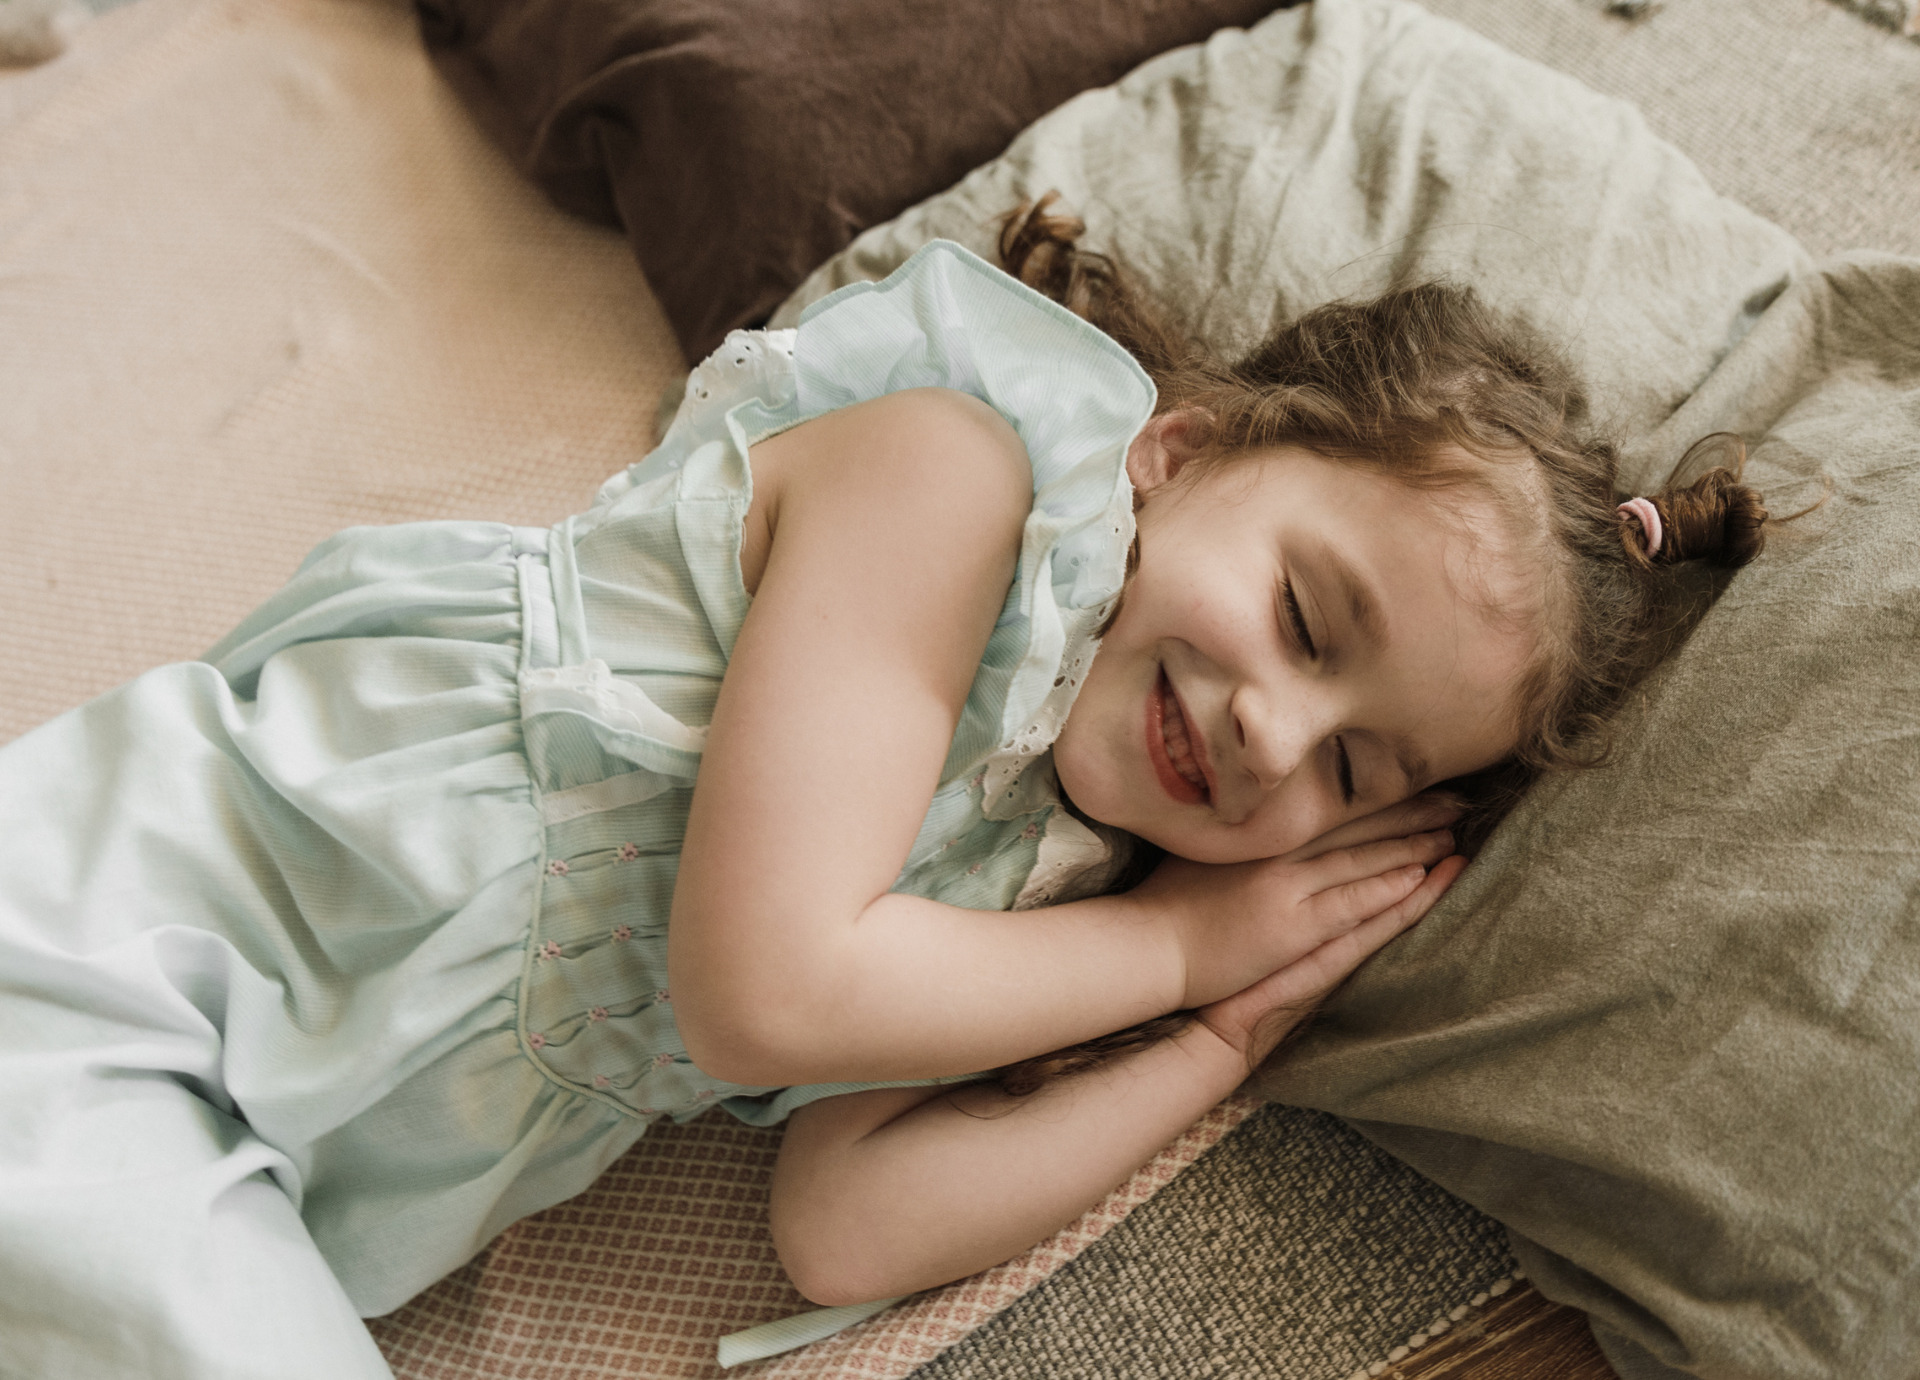 Smiling female child laying down in bed with head resting on a pillow